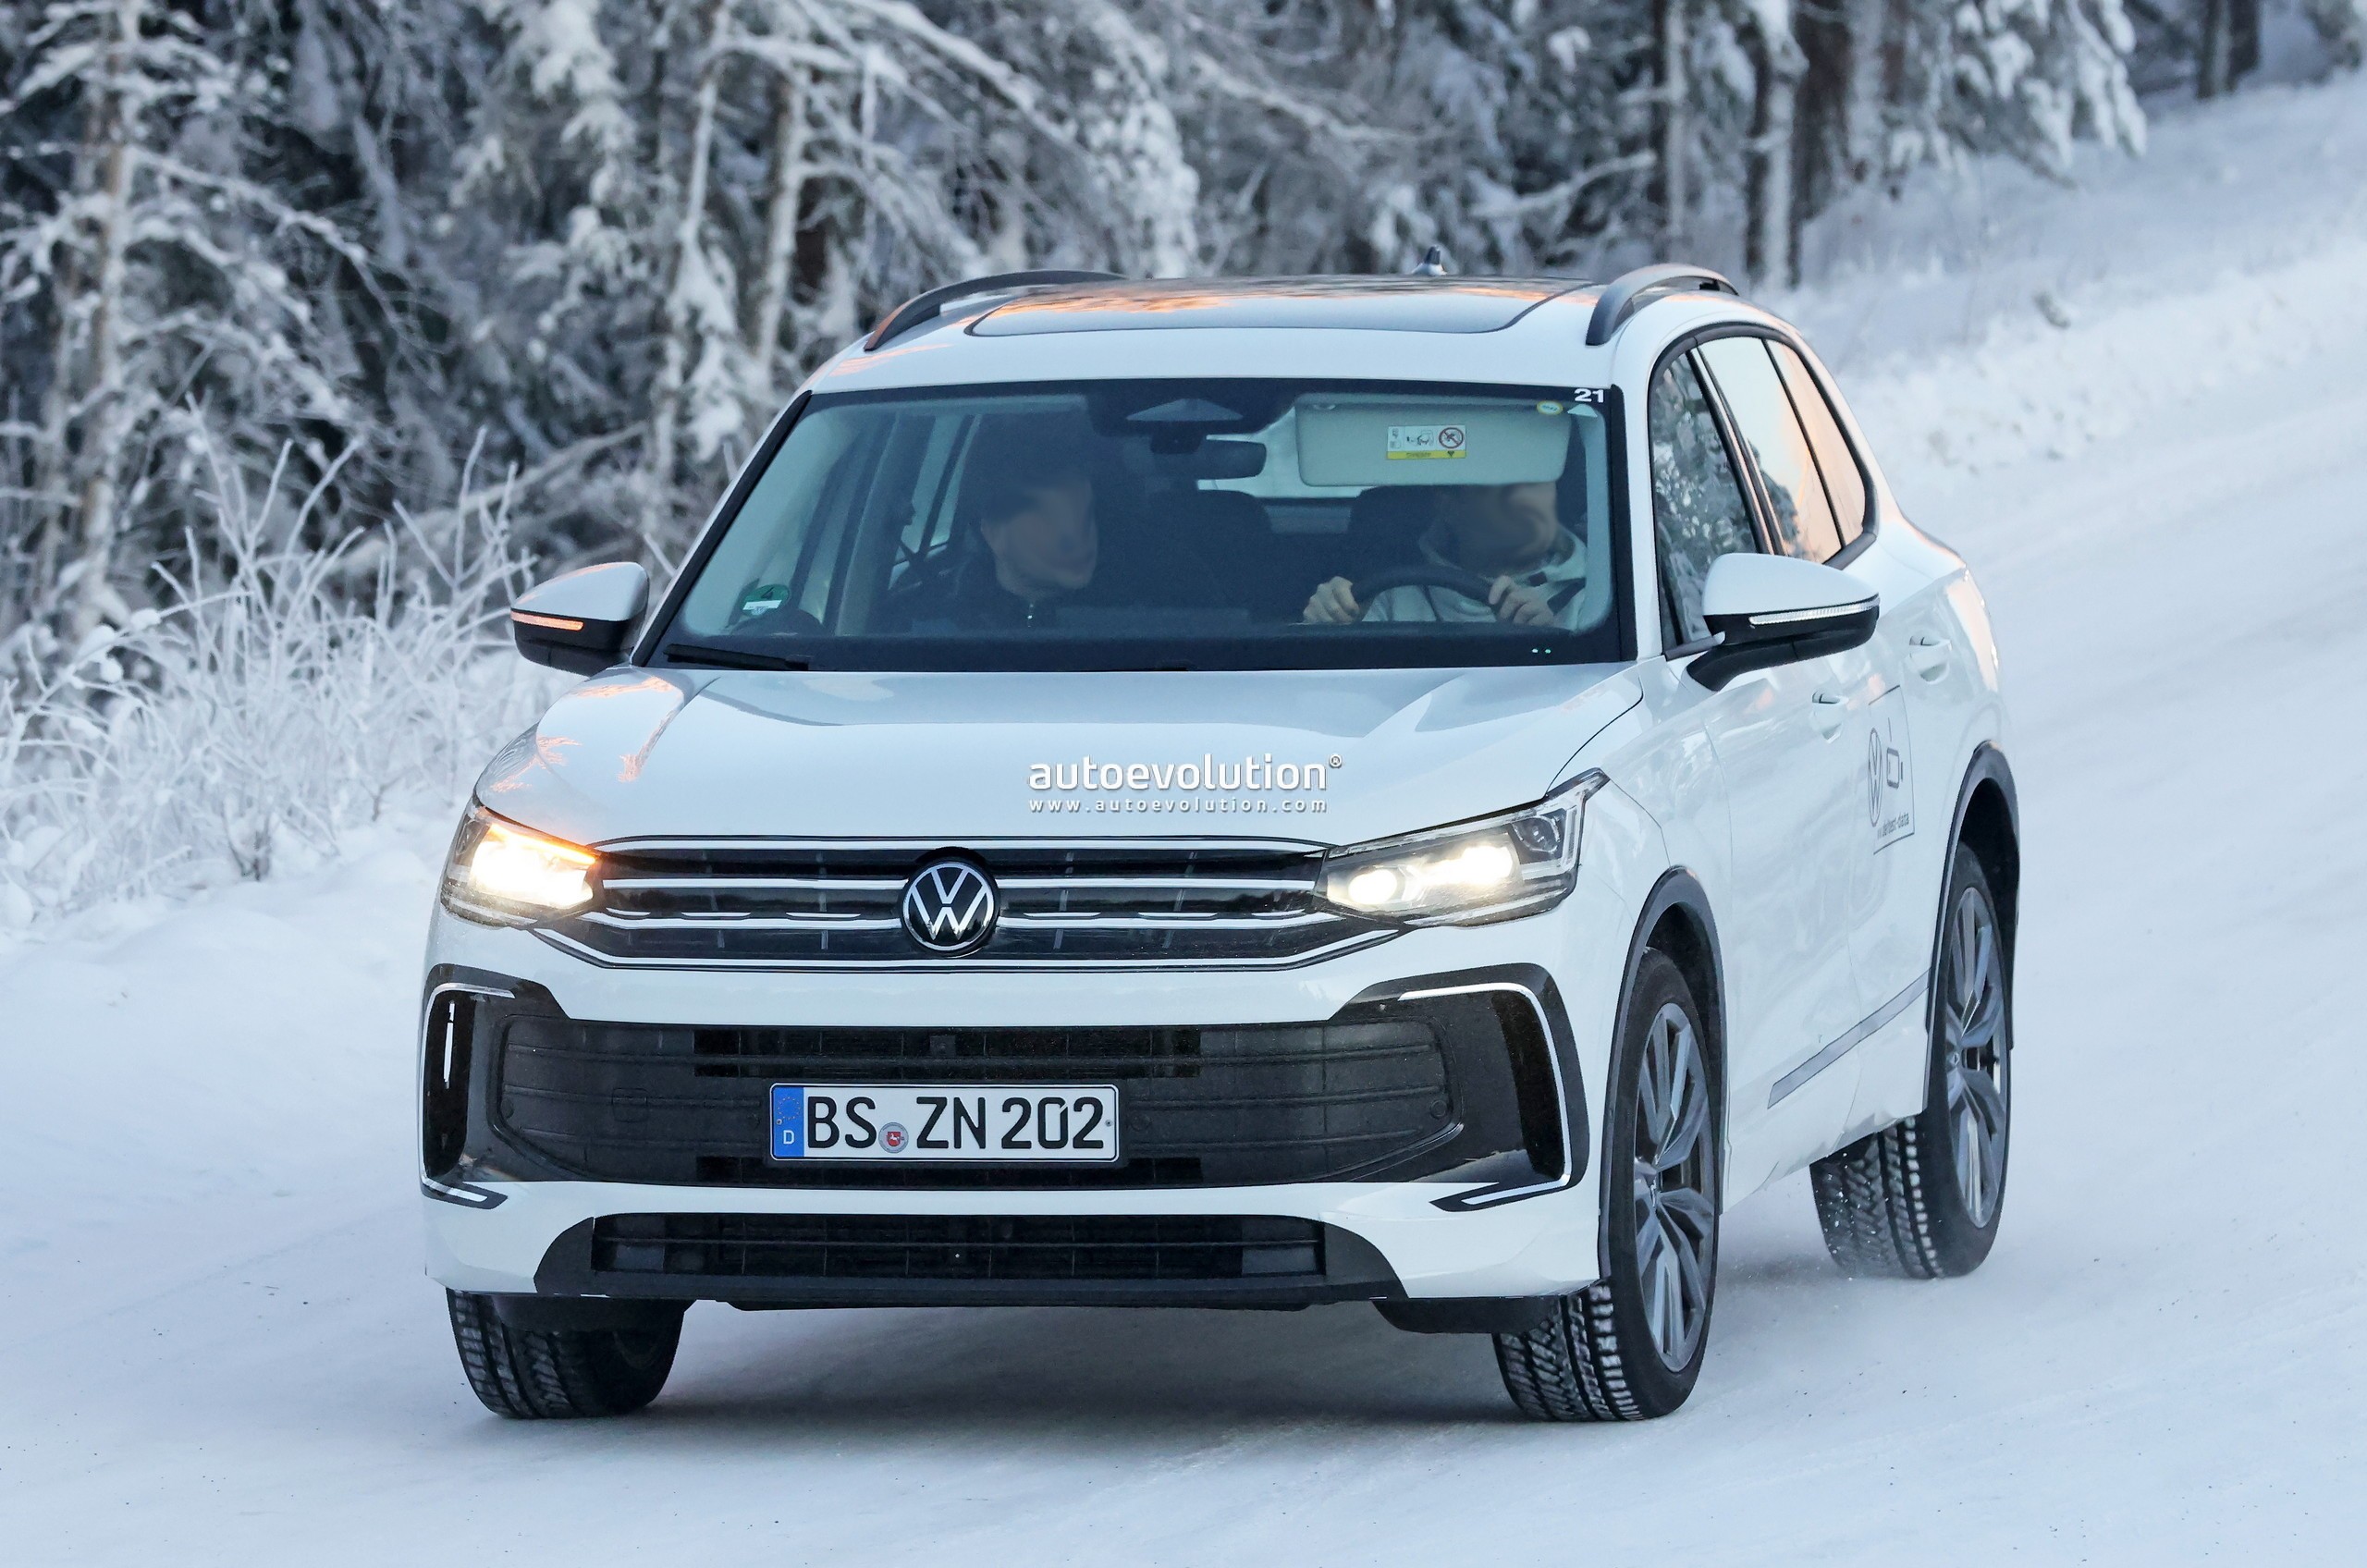 2025 Vw Tiguan Embraces The Cold Gets Tested In 10f Autoevolution